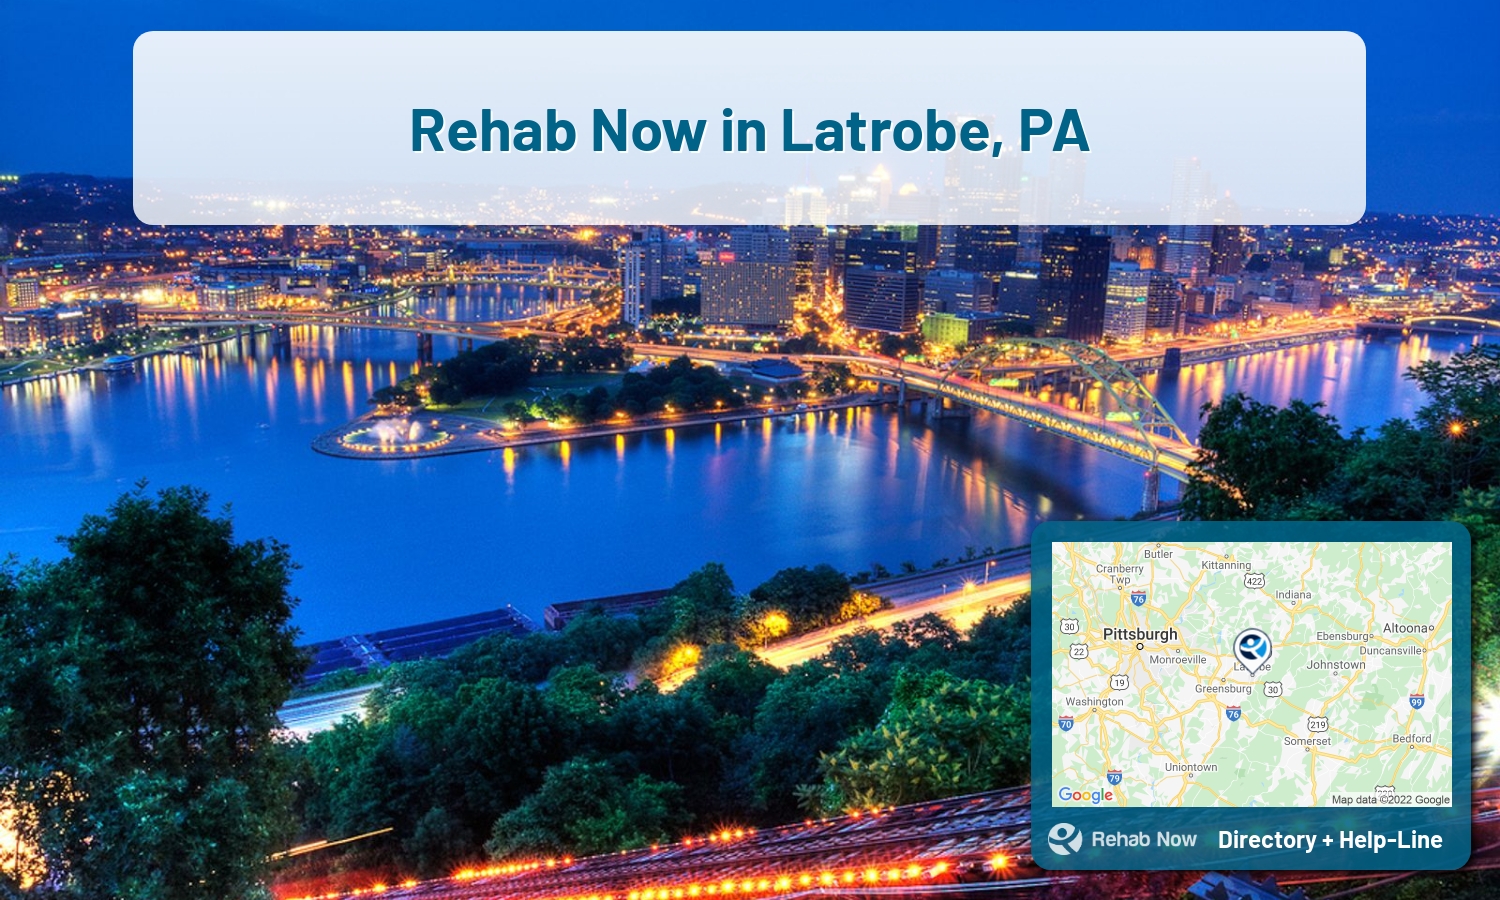 Our experts can help you find treatment now in Latrobe, Pennsylvania. We list drug rehab and alcohol centers in Pennsylvania.